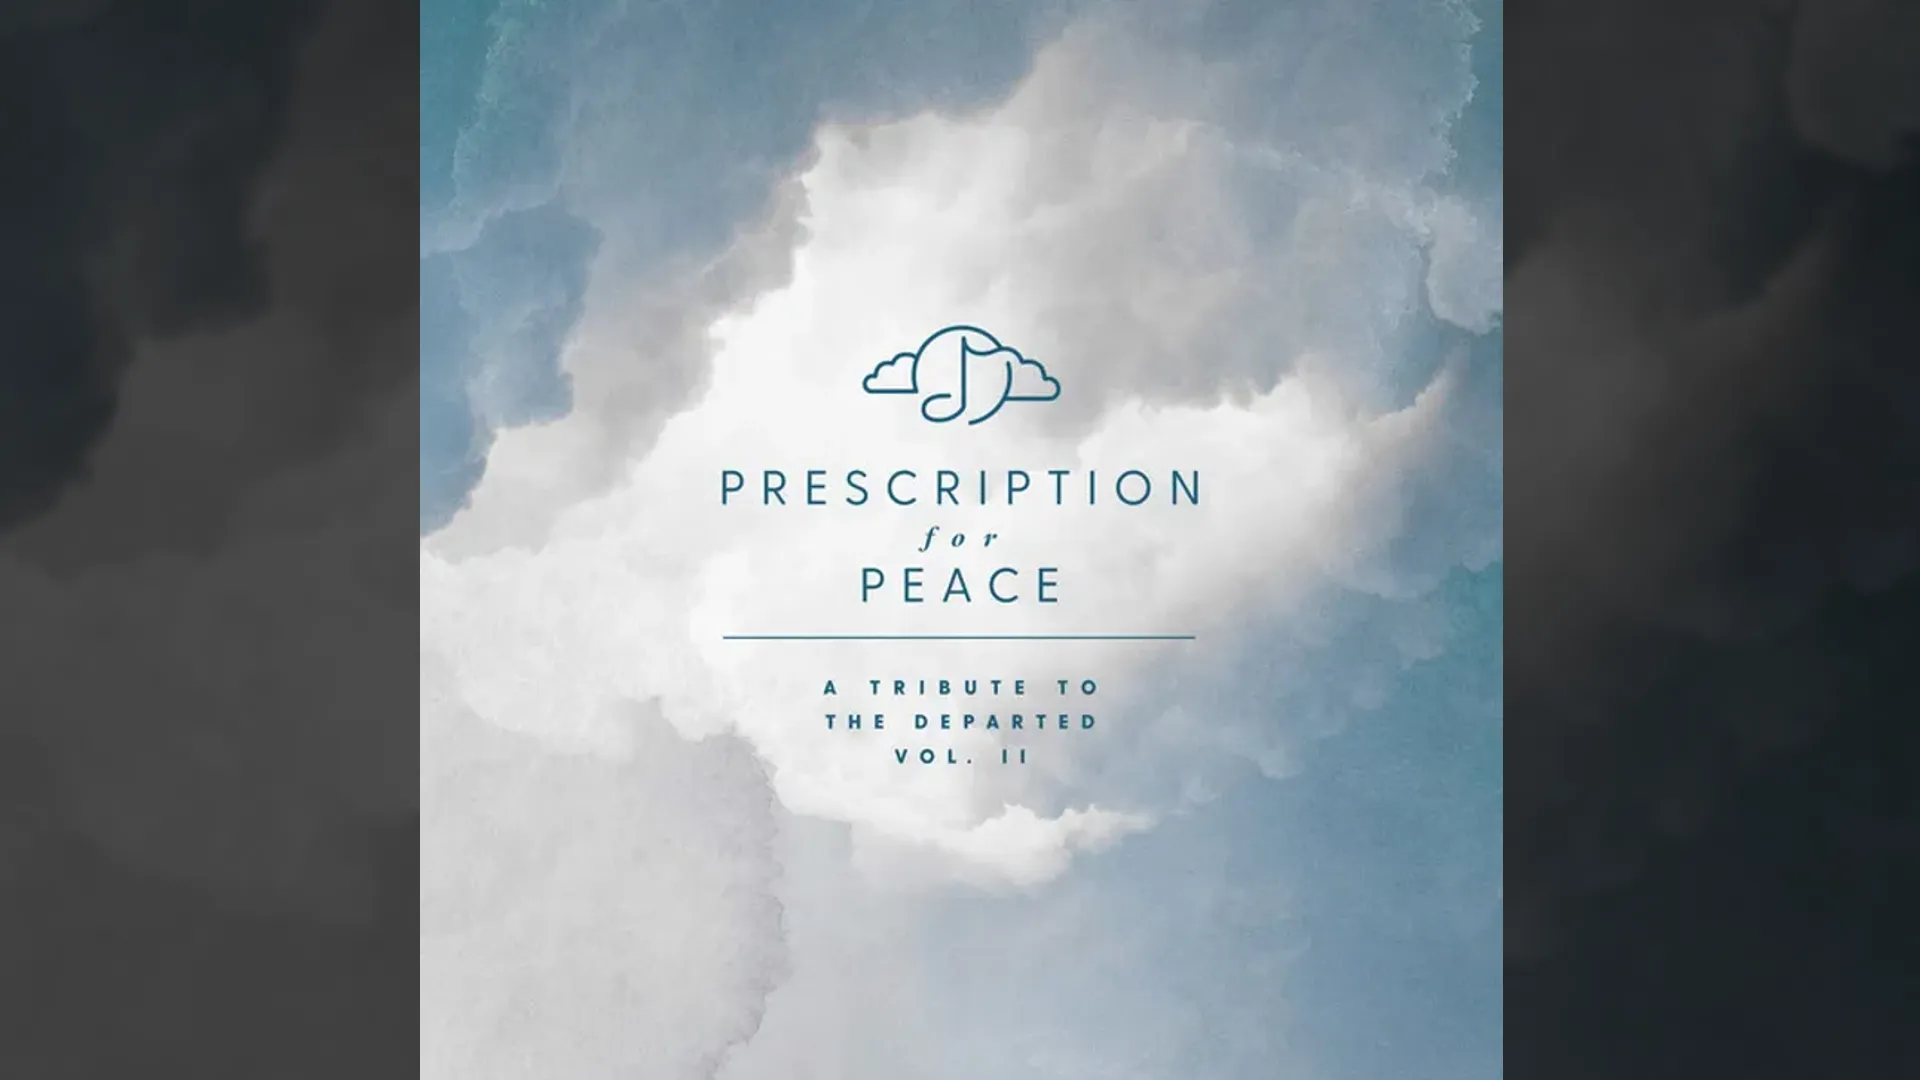 Front cover of Prescription for Peace: A Tribute to the Departed Volume II, which honors Suikoden creator Yoshitaka Murayama